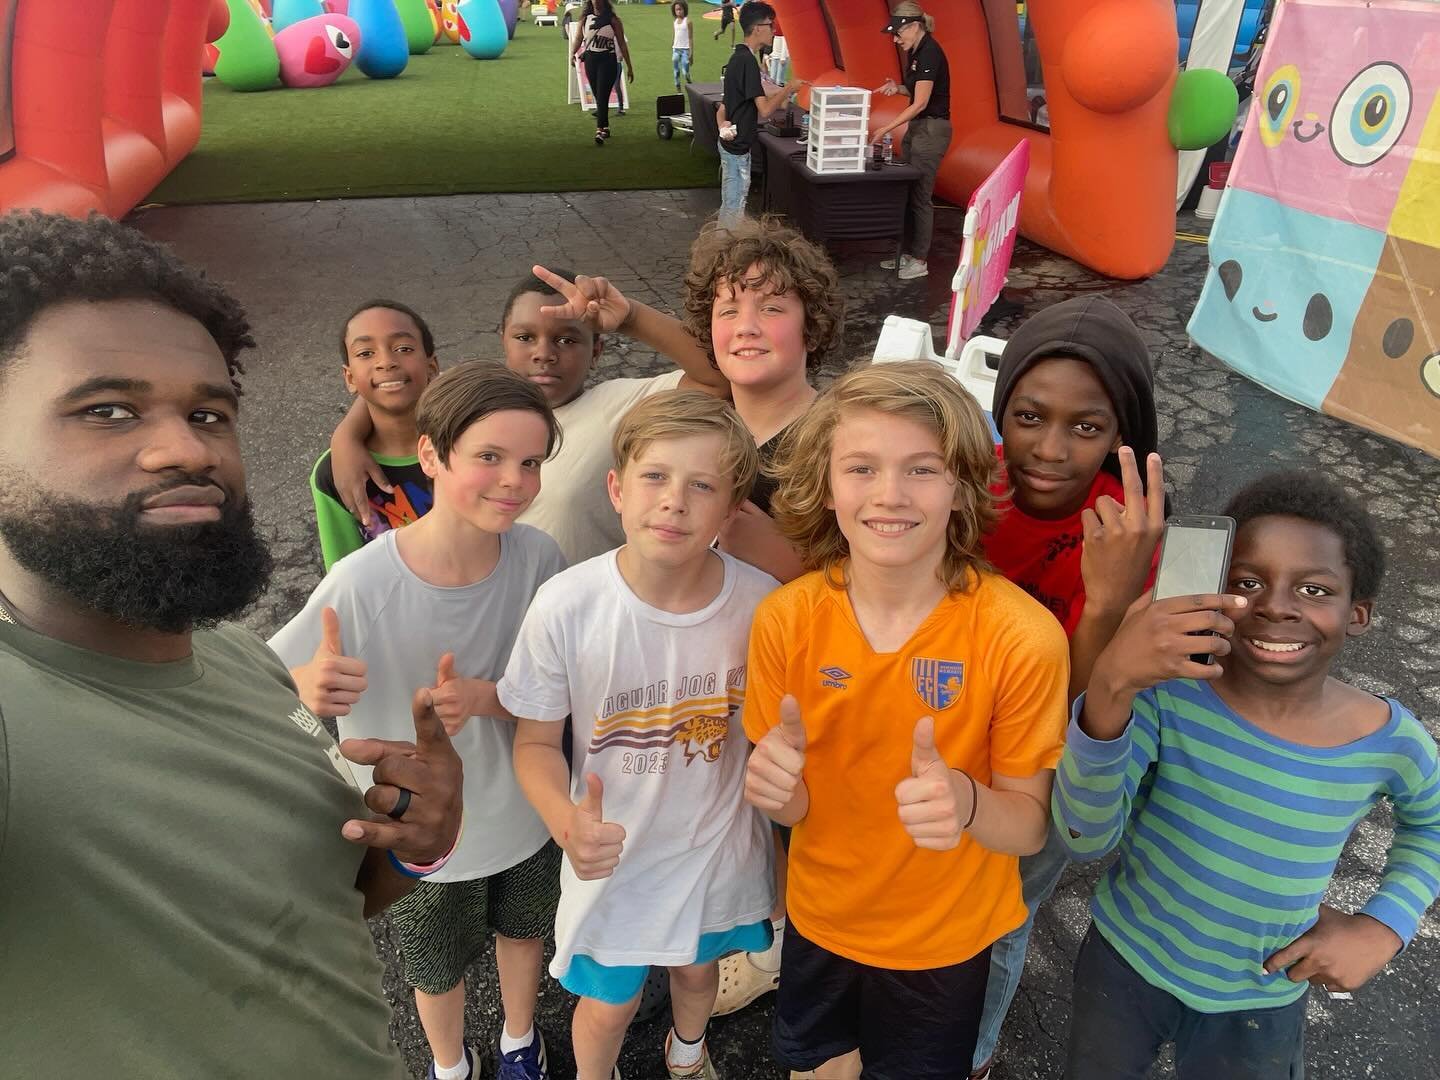 FUNBOX @funbox was too fun for the squad 🔥 
.
We Jumped! 🙌🏾Laughed! 🤣 Sweat! 🥵 and all that up under the sun! ☀️ 
It&rsquo;s always a joy to see kids&rsquo; true nature and innocence come out when they detach from the distracting world and attac